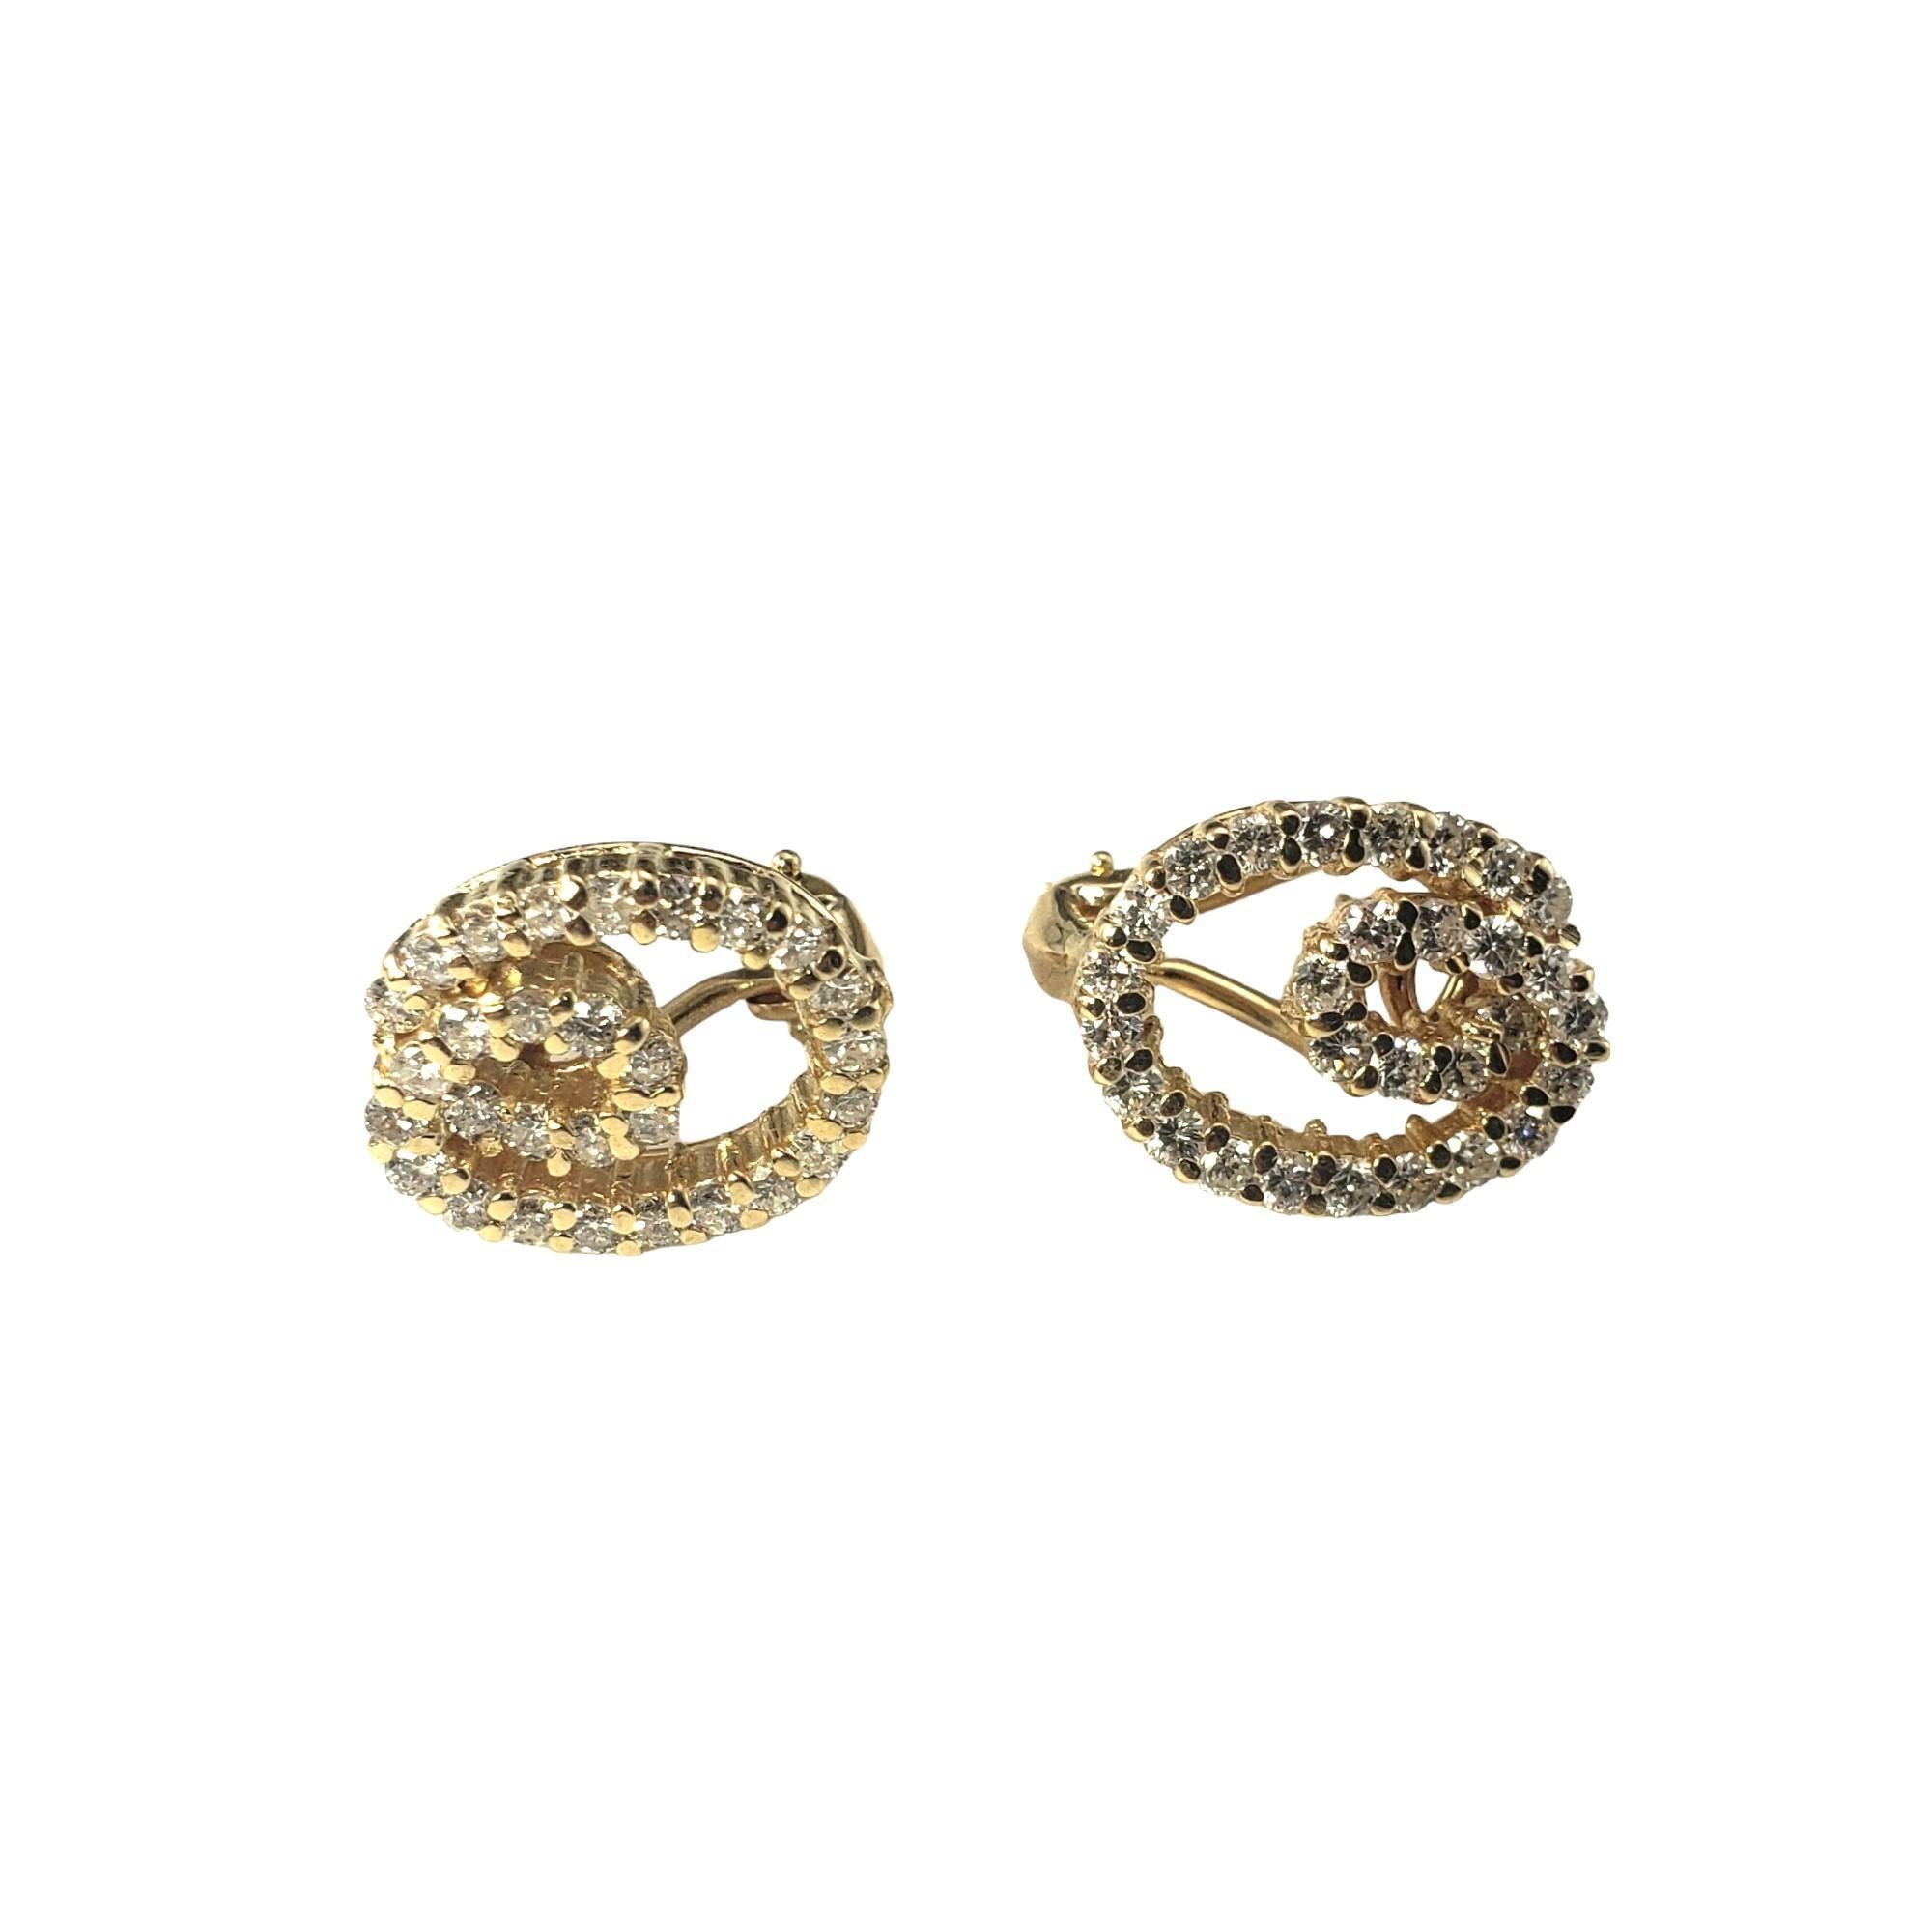 Vintage 14 Karat Yellow Gold Double Oval Diamond Earrings-

These sparkling earrings each feature 29 round brilliant cut diamonds set in classic 14K yellow gold.  Omega back closures.

Approximate total diamond weight: 1.16 ct.

Diamond color: